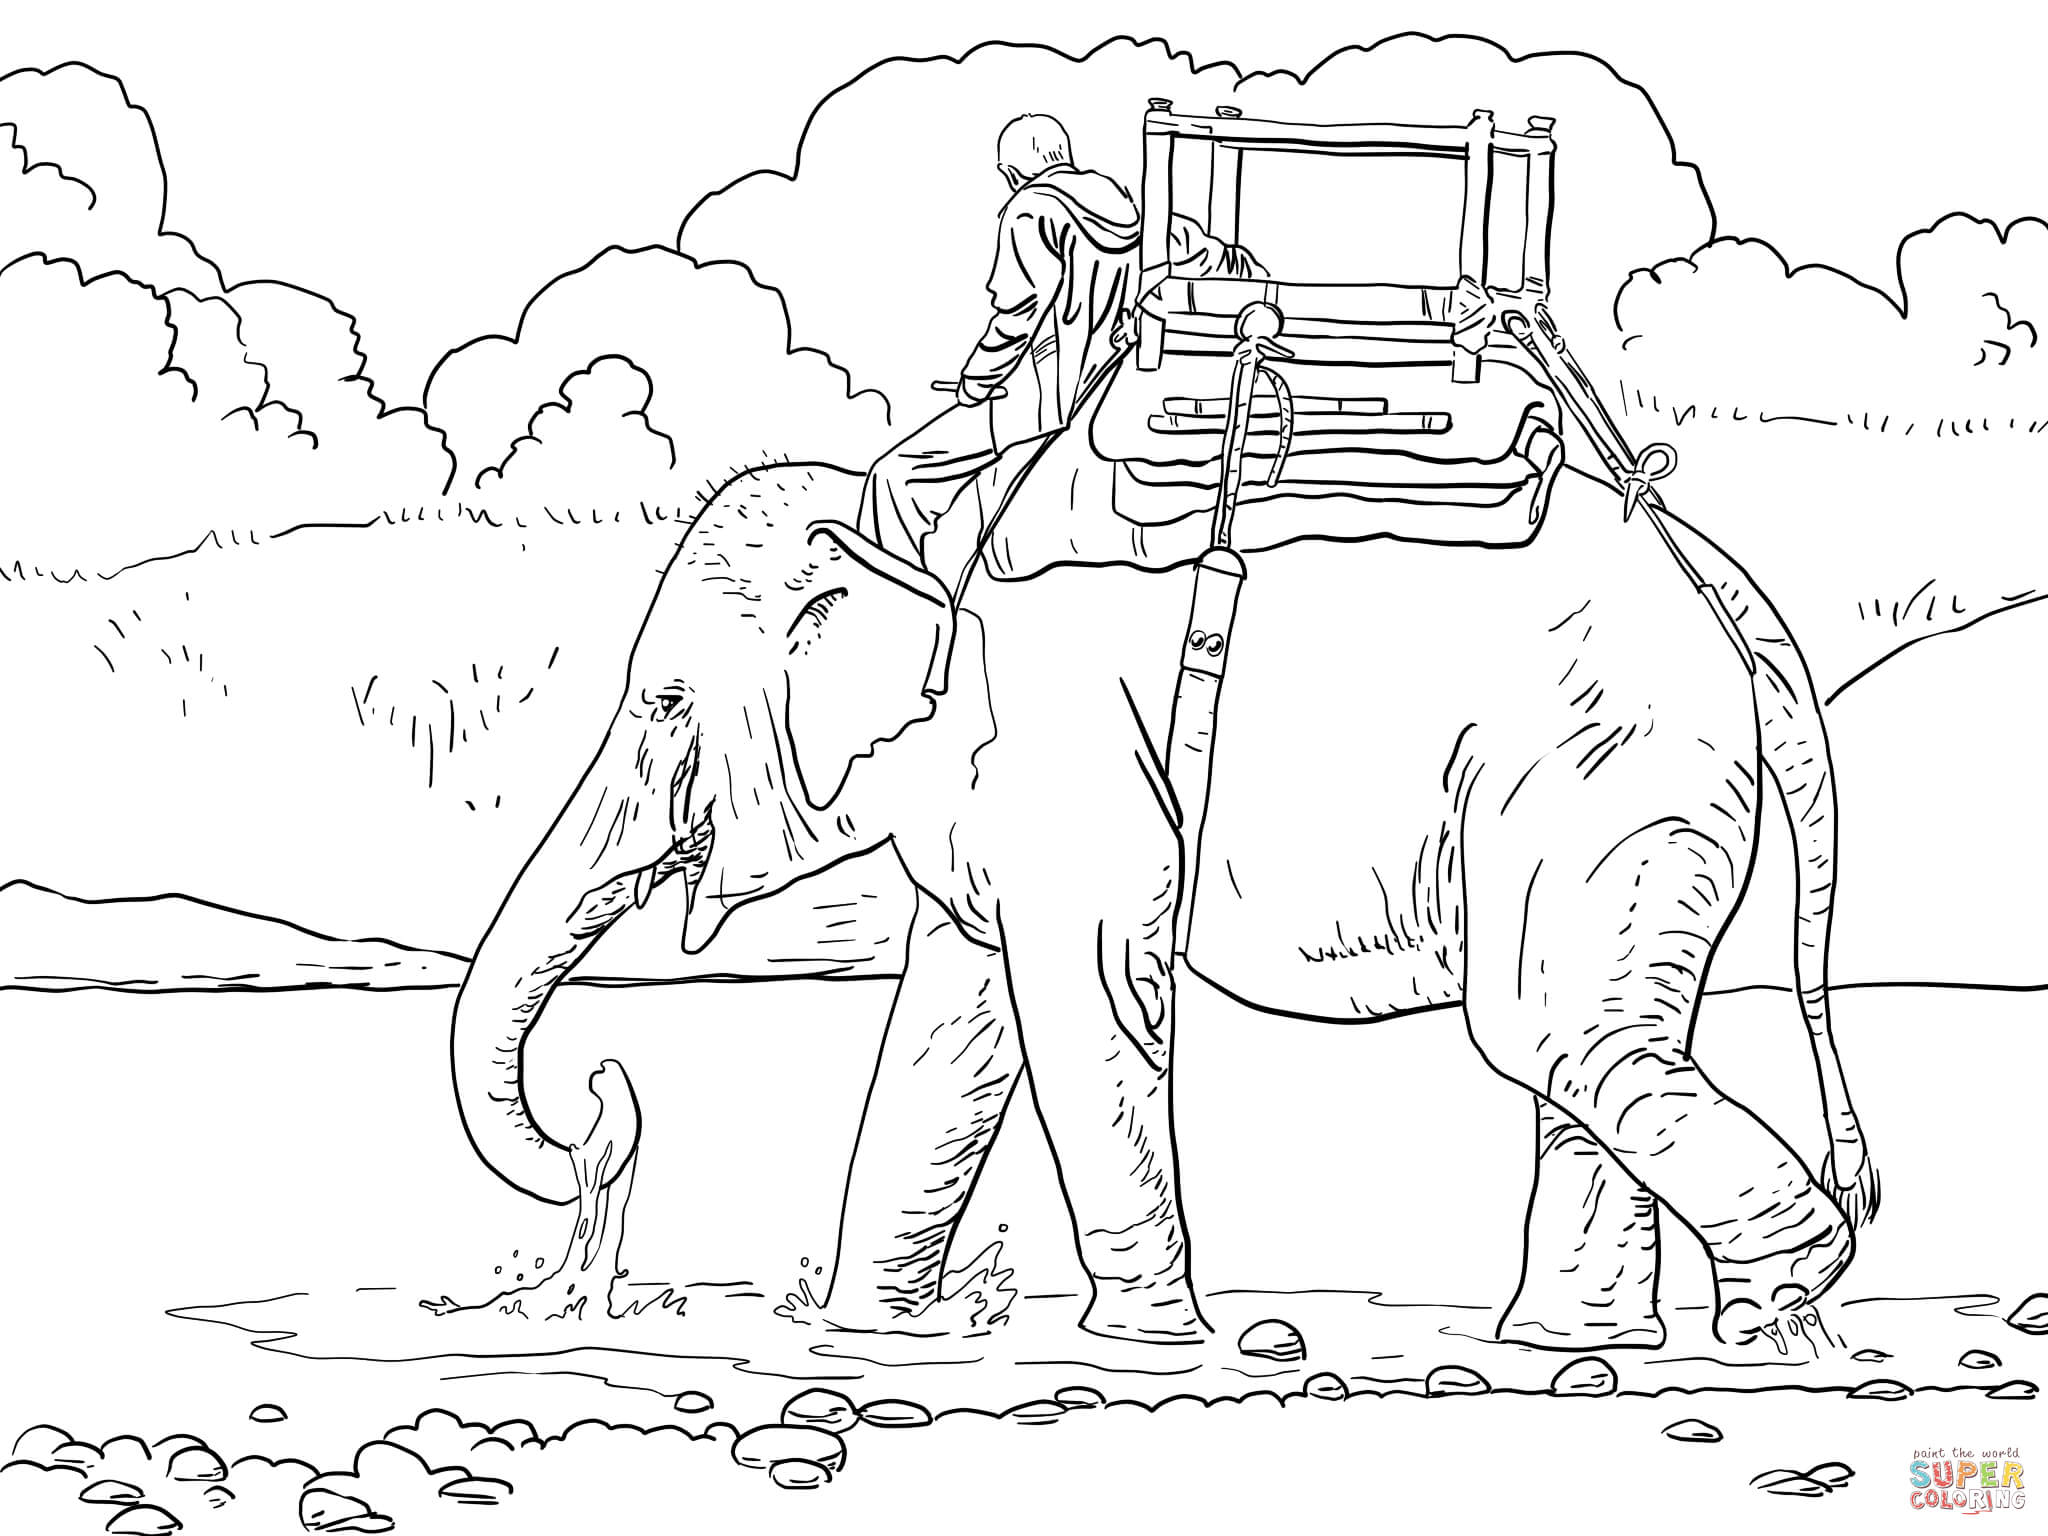 Asian Elephant coloring #13, Download drawings